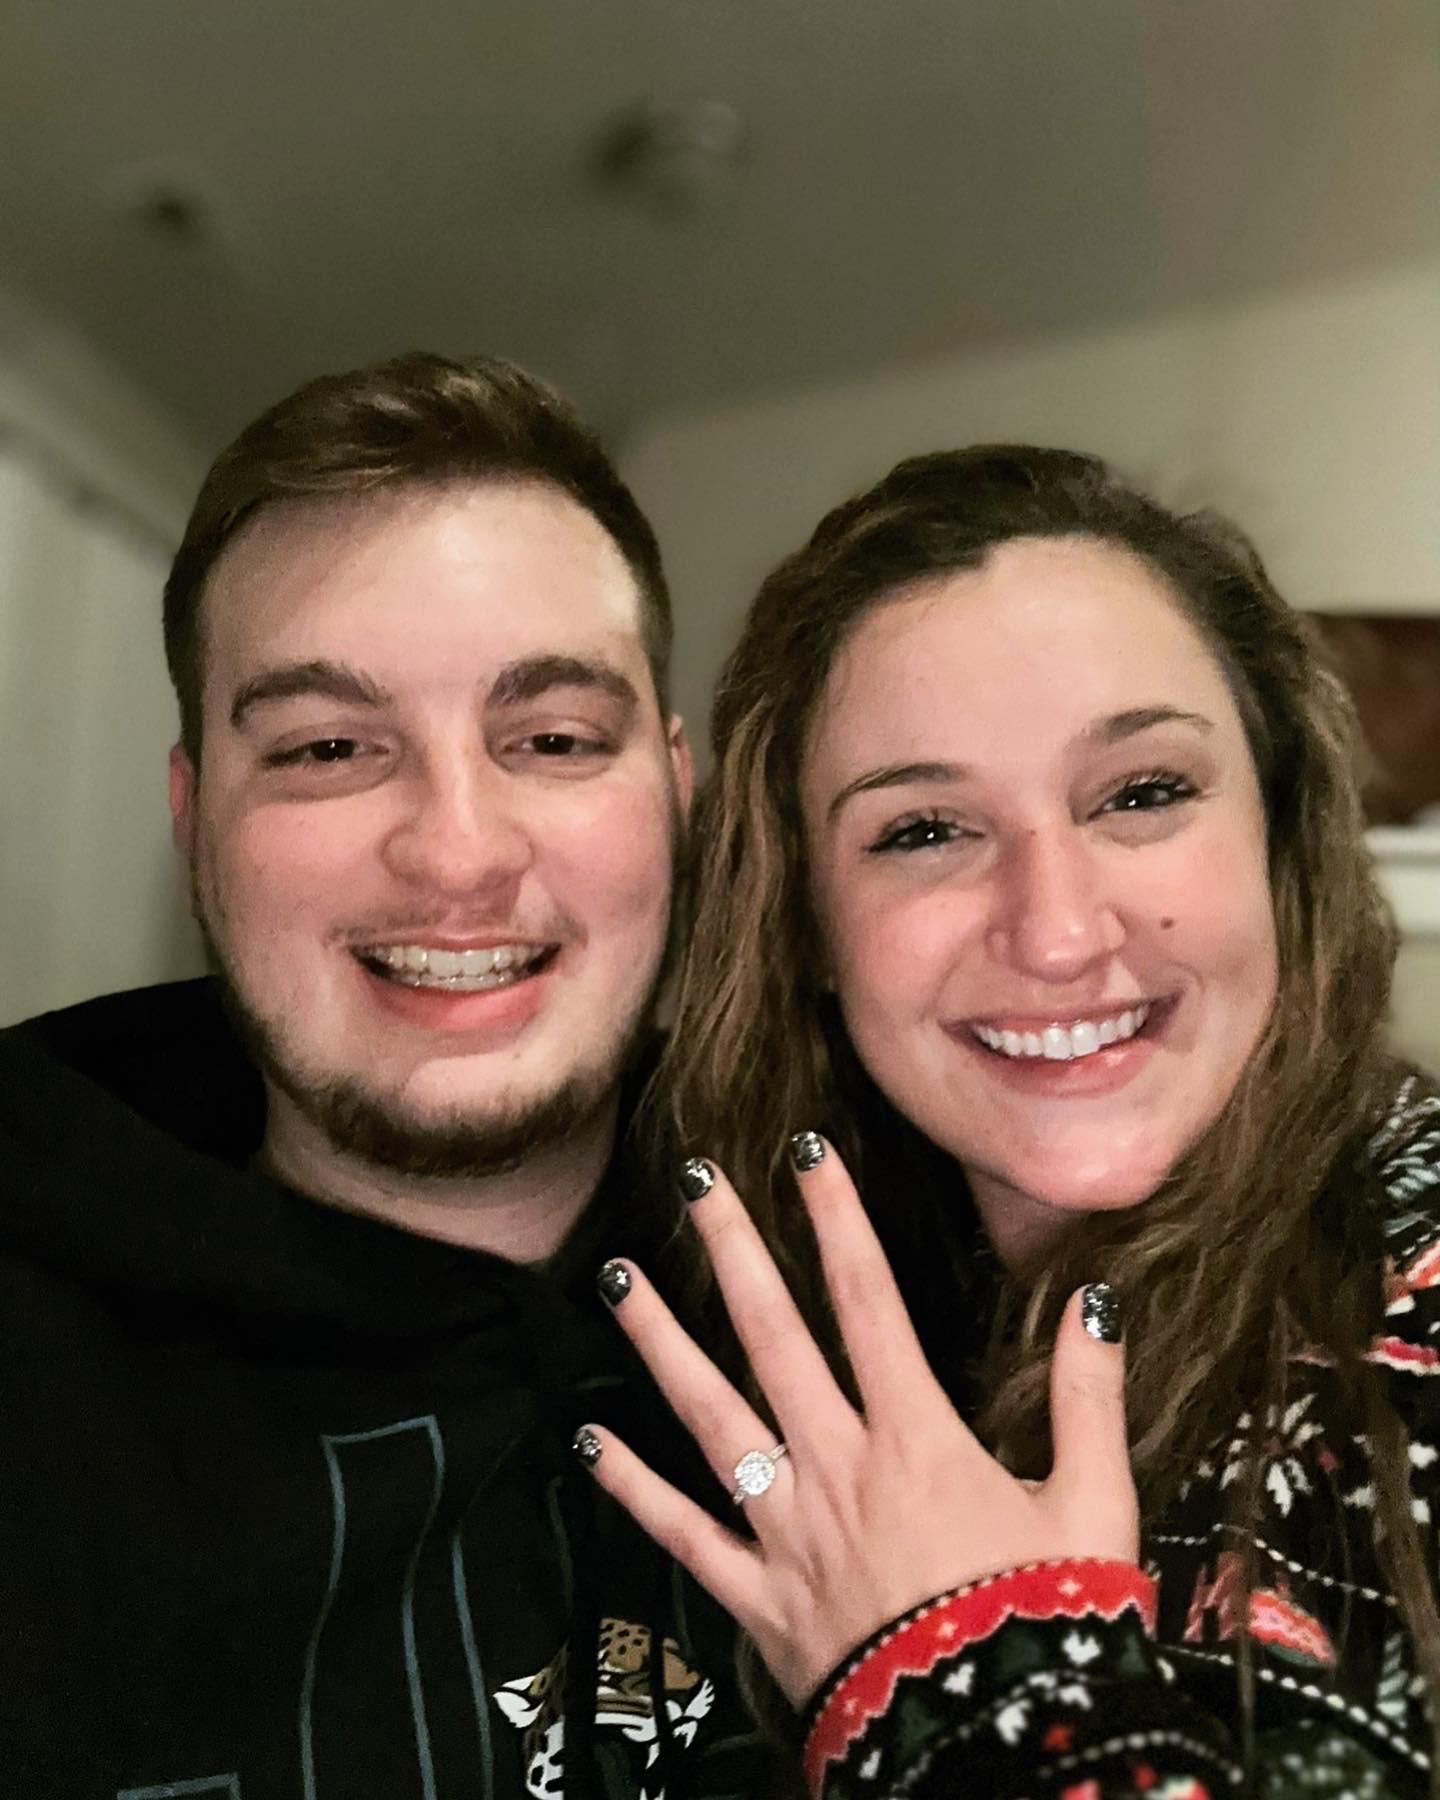 The day they got engaged!